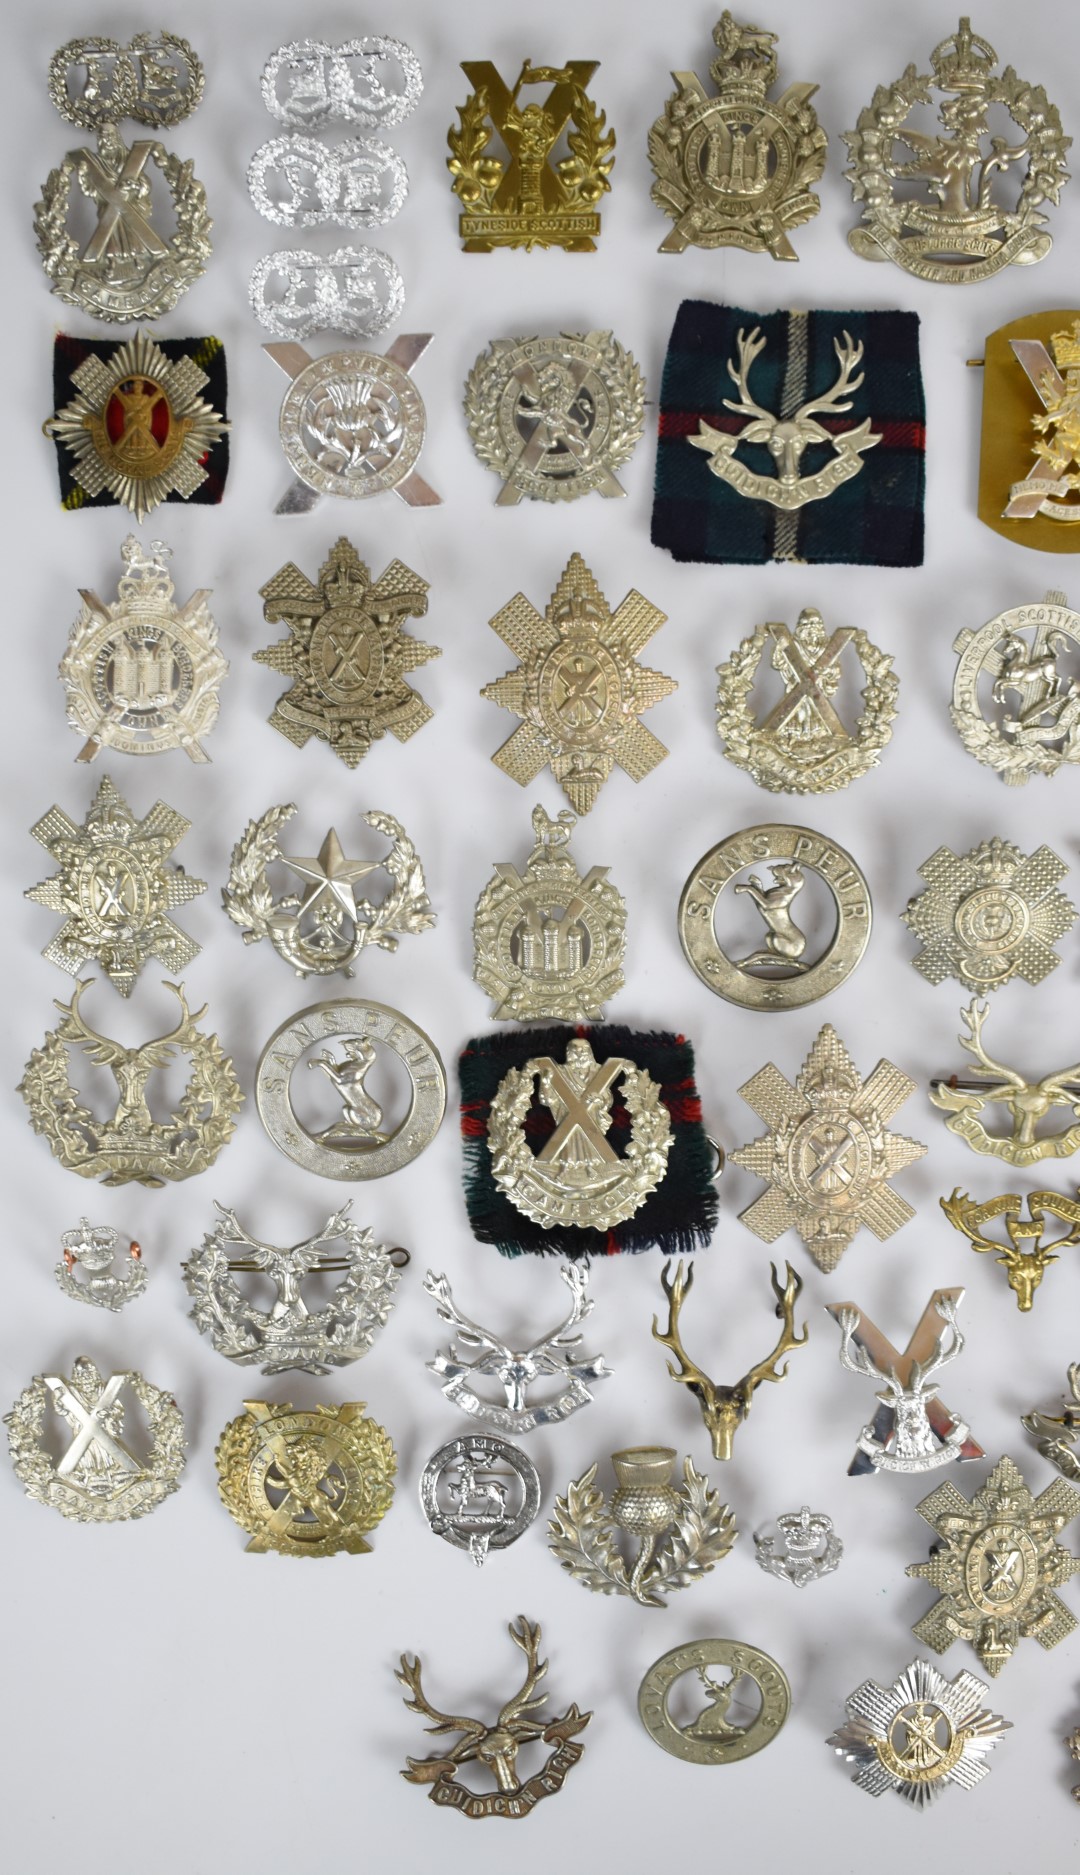 Collection of approximately 60 British Army Scottish Regiment badges including Royal Scots Guards, - Image 2 of 6